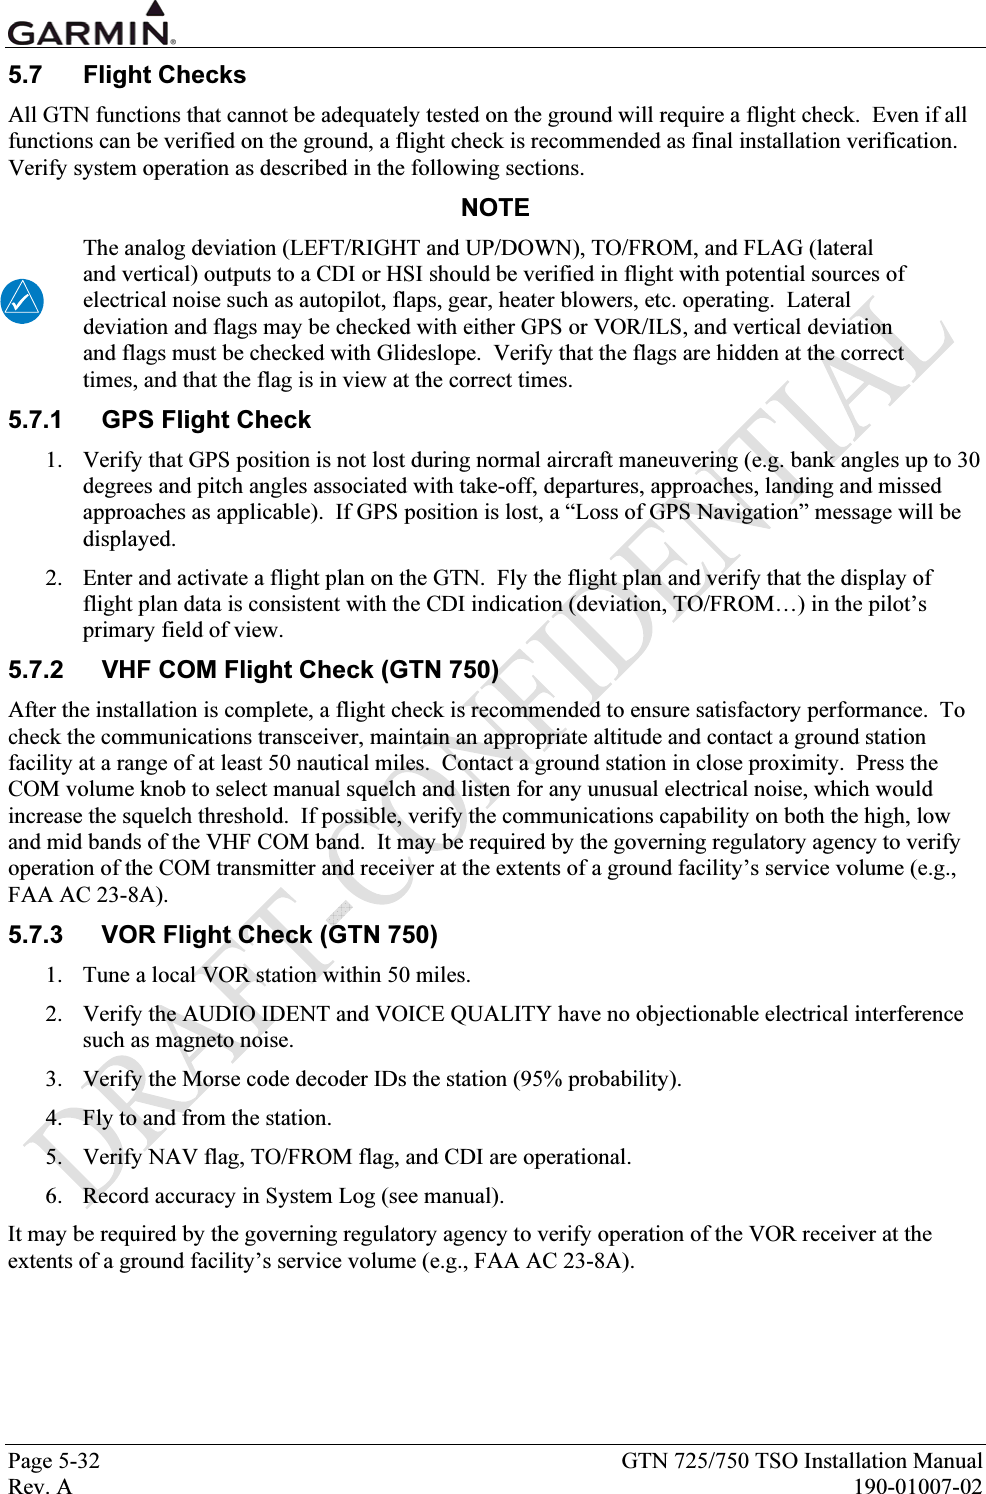  Page 5-32  GTN 725/750 TSO Installation Manual Rev. A  190-01007-02 5.7 Flight Checks All GTN functions that cannot be adequately tested on the ground will require a flight check.  Even if all functions can be verified on the ground, a flight check is recommended as final installation verification.  Verify system operation as described in the following sections.  NOTE The analog deviation (LEFT/RIGHT and UP/DOWN), TO/FROM, and FLAG (lateral and vertical) outputs to a CDI or HSI should be verified in flight with potential sources of electrical noise such as autopilot, flaps, gear, heater blowers, etc. operating.  Lateral deviation and flags may be checked with either GPS or VOR/ILS, and vertical deviation and flags must be checked with Glideslope.  Verify that the flags are hidden at the correct times, and that the flag is in view at the correct times. 5.7.1  GPS Flight Check 1. Verify that GPS position is not lost during normal aircraft maneuvering (e.g. bank angles up to 30 degrees and pitch angles associated with take-off, departures, approaches, landing and missed approaches as applicable).  If GPS position is lost, a “Loss of GPS Navigation” message will be displayed. 2. Enter and activate a flight plan on the GTN.  Fly the flight plan and verify that the display of flight plan data is consistent with the CDI indication (deviation, TO/FROM…) in the pilot’s primary field of view. 5.7.2  VHF COM Flight Check (GTN 750) After the installation is complete, a flight check is recommended to ensure satisfactory performance.  To check the communications transceiver, maintain an appropriate altitude and contact a ground station facility at a range of at least 50 nautical miles.  Contact a ground station in close proximity.  Press the COM volume knob to select manual squelch and listen for any unusual electrical noise, which would increase the squelch threshold.  If possible, verify the communications capability on both the high, low and mid bands of the VHF COM band.  It may be required by the governing regulatory agency to verify operation of the COM transmitter and receiver at the extents of a ground facility’s service volume (e.g., FAA AC 23-8A). 5.7.3  VOR Flight Check (GTN 750) 1. Tune a local VOR station within 50 miles.  2. Verify the AUDIO IDENT and VOICE QUALITY have no objectionable electrical interference such as magneto noise. 3. Verify the Morse code decoder IDs the station (95% probability). 4. Fly to and from the station. 5. Verify NAV flag, TO/FROM flag, and CDI are operational. 6. Record accuracy in System Log (see manual). It may be required by the governing regulatory agency to verify operation of the VOR receiver at the extents of a ground facility’s service volume (e.g., FAA AC 23-8A). 